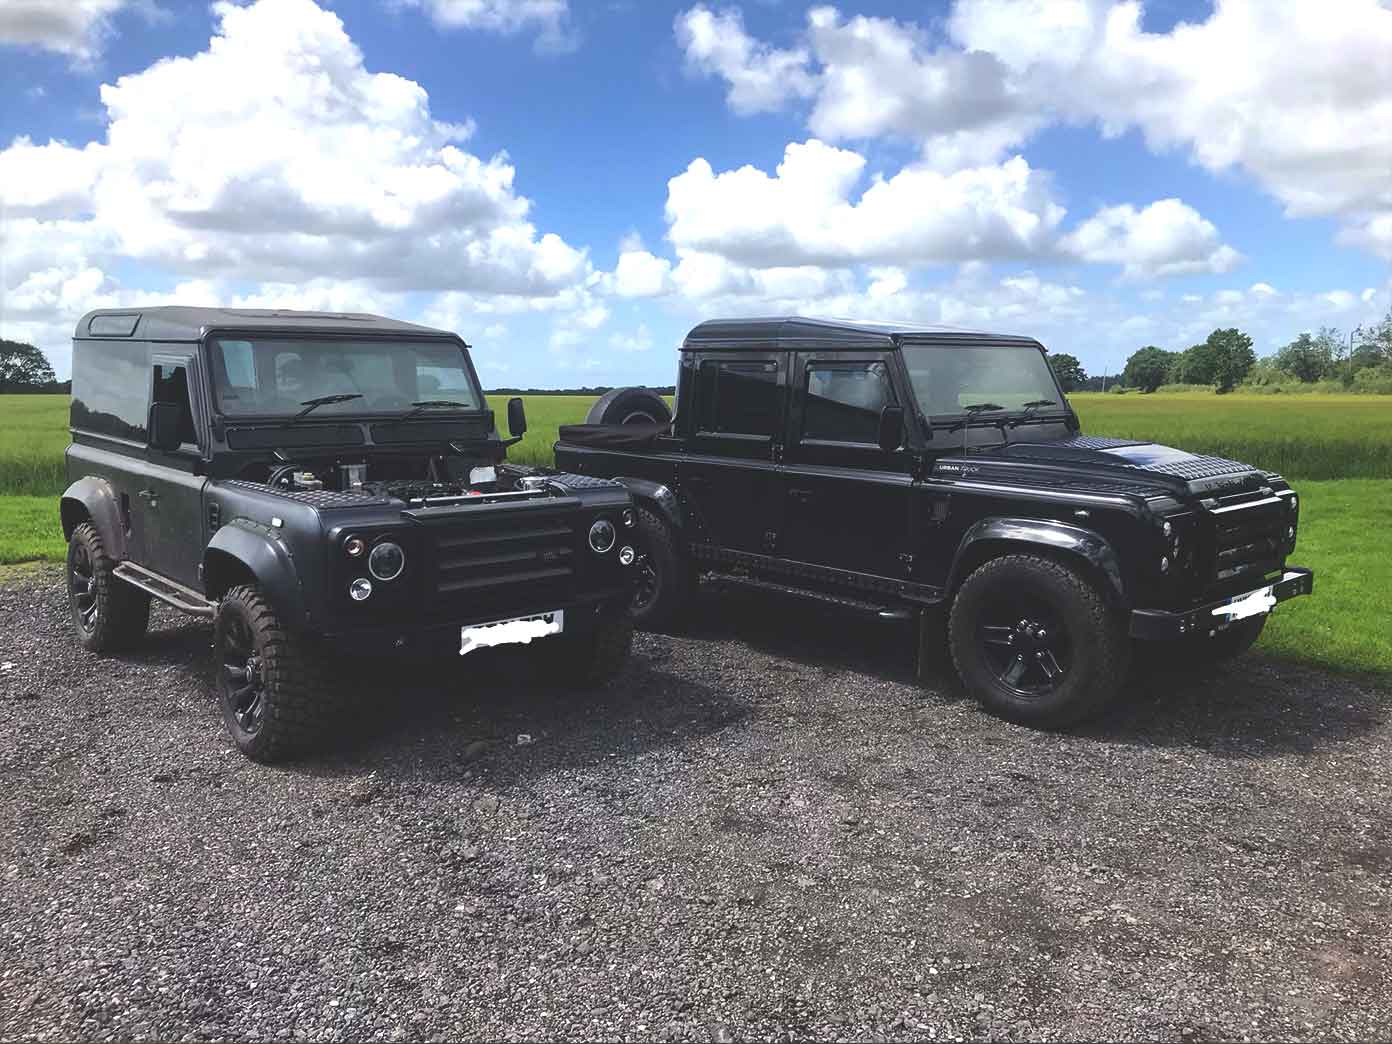 Ready to drive away BMW engine conversion in a Land Rover Defender